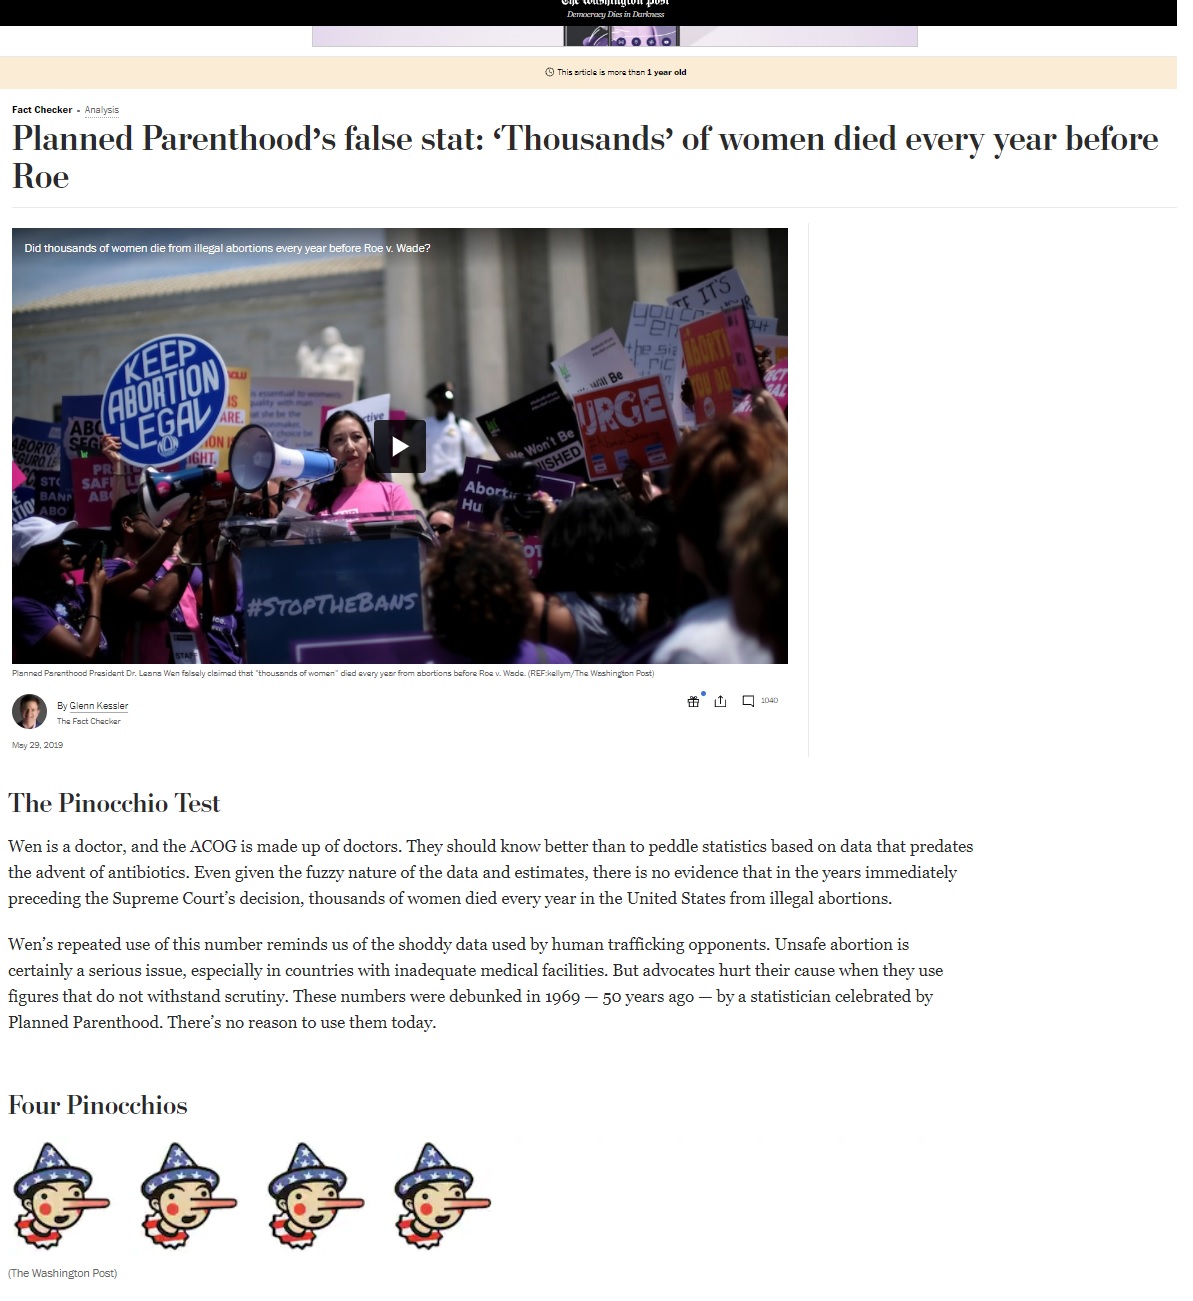 Image: WAPO rates claim thousands of women died from illegal abortion as false